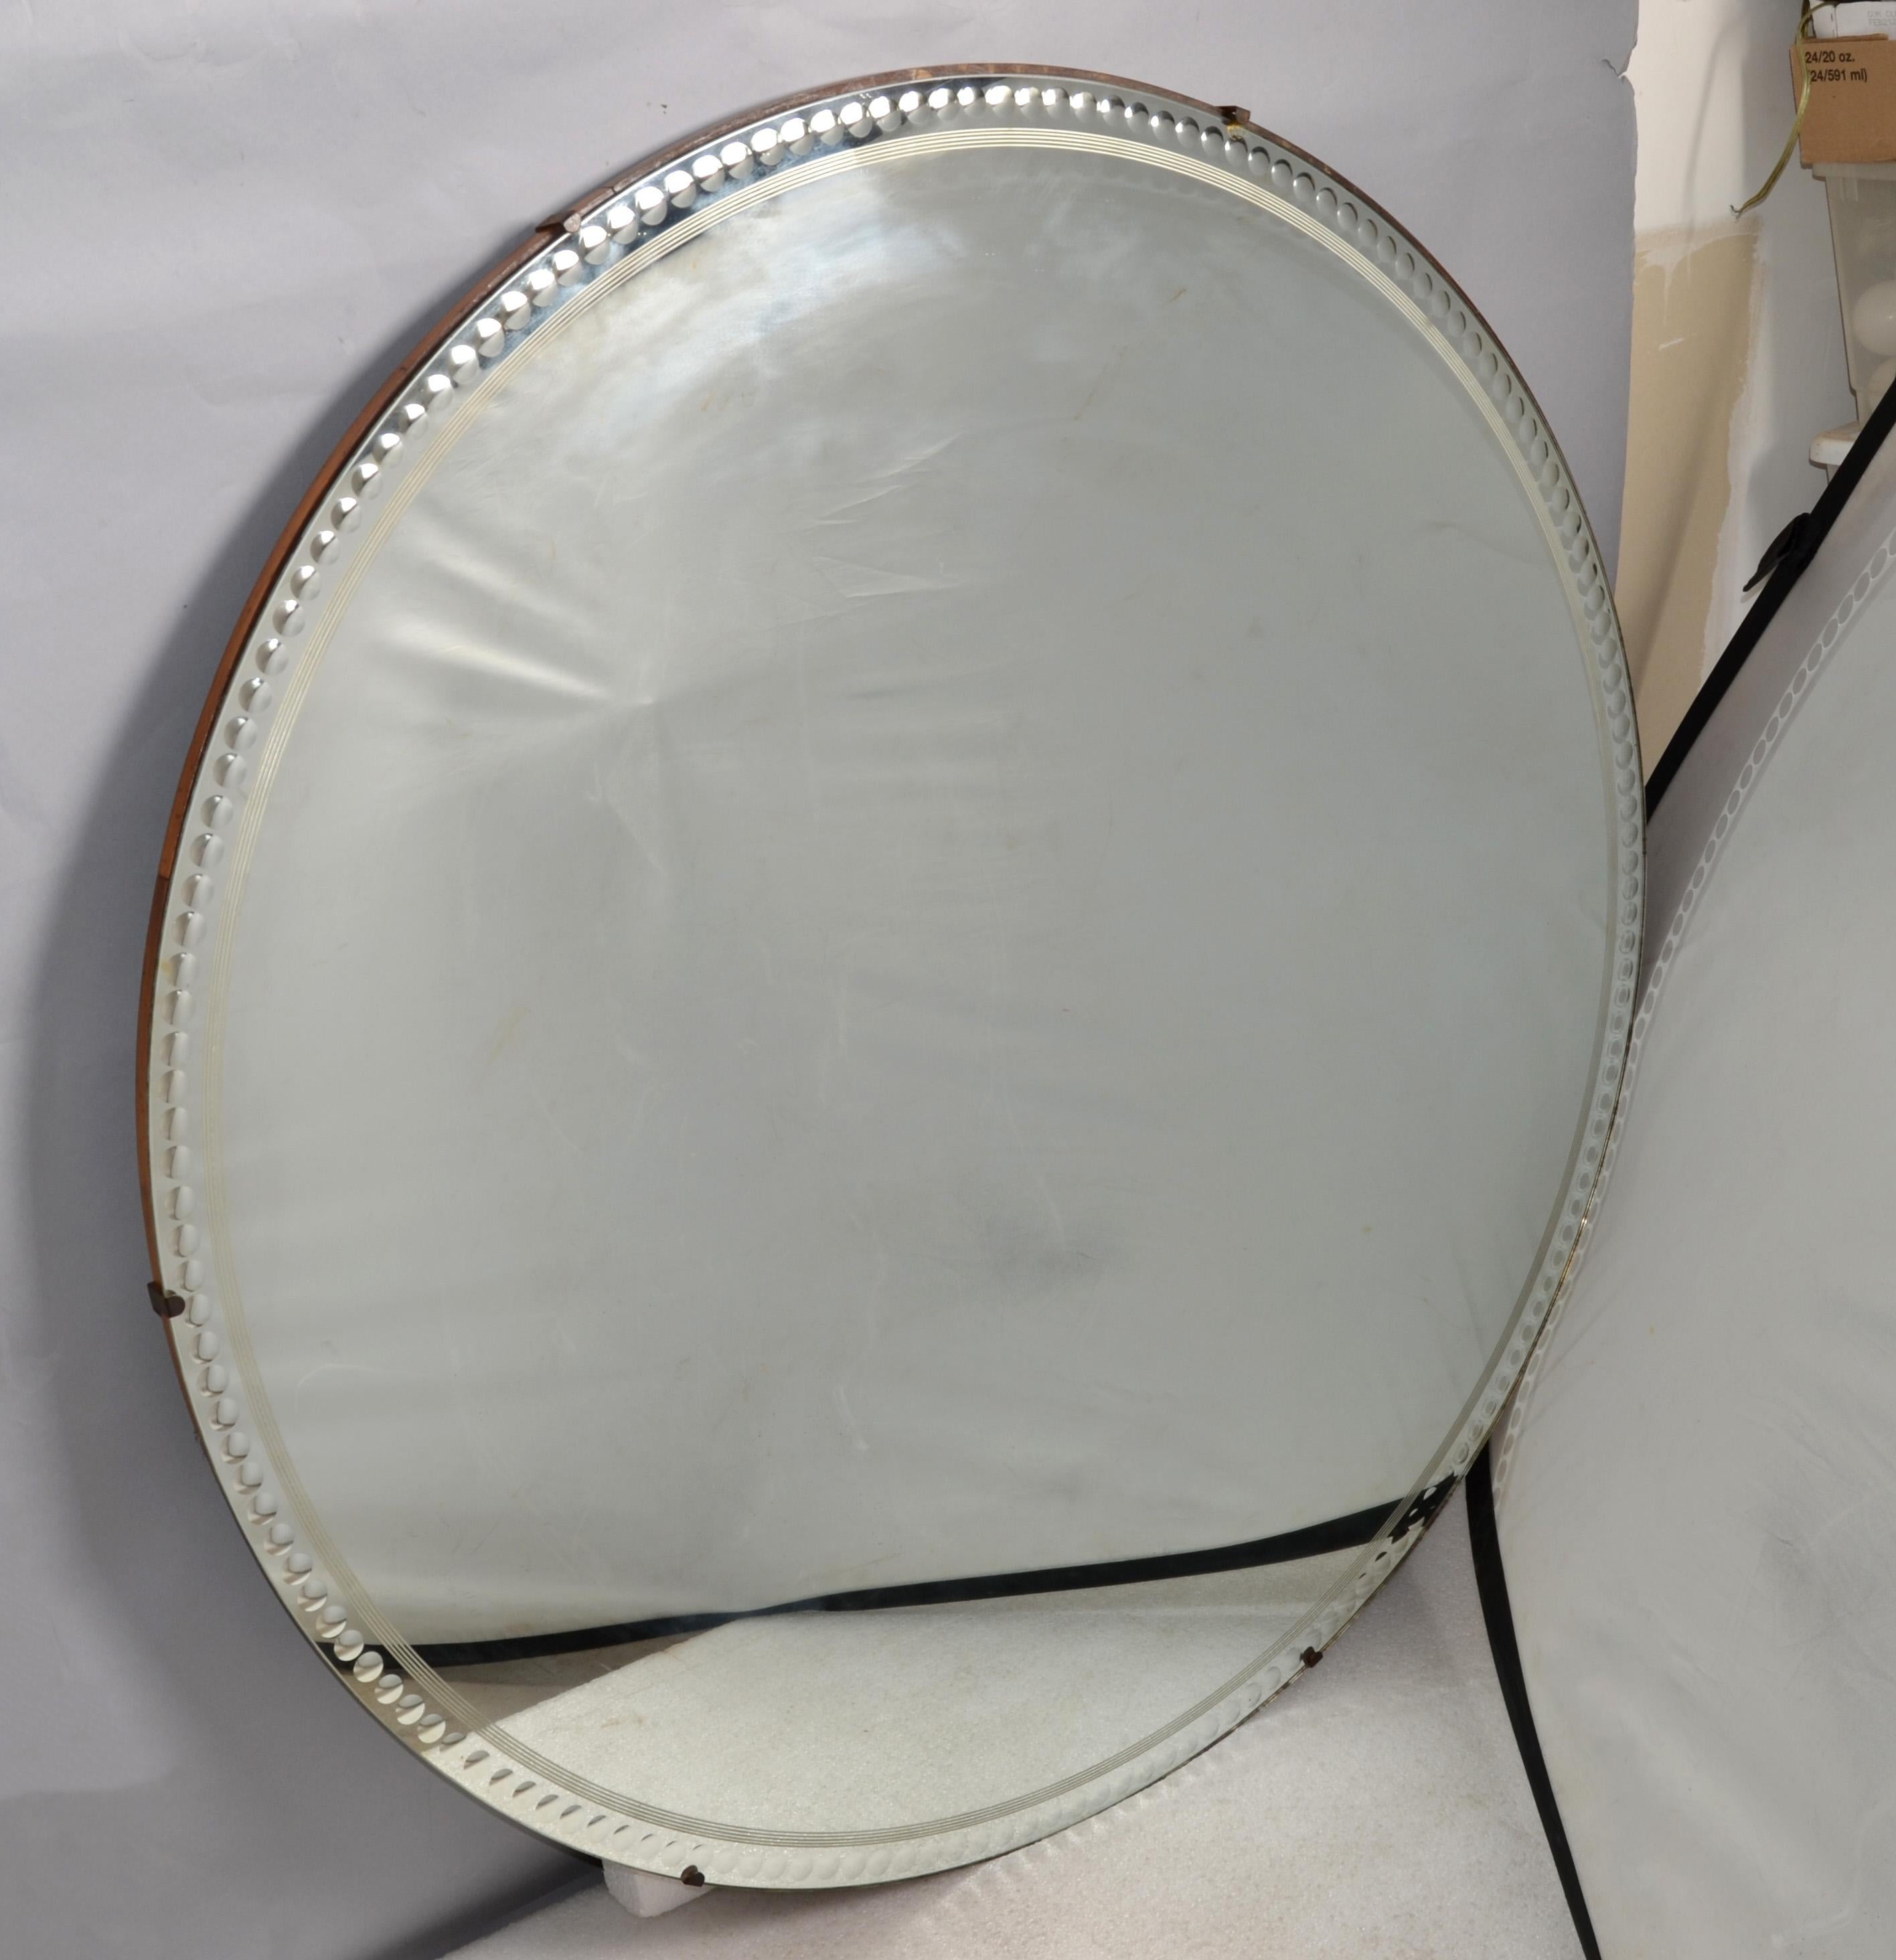 Italian large round Wall Mirror Art Deco Style with small convex circular bubbles Decor.
The technique which was frequently employed in the designs of Max Ingrand, Piere Fornasetti and Luigi Brusotti.
The original round Mirror has a thick wood